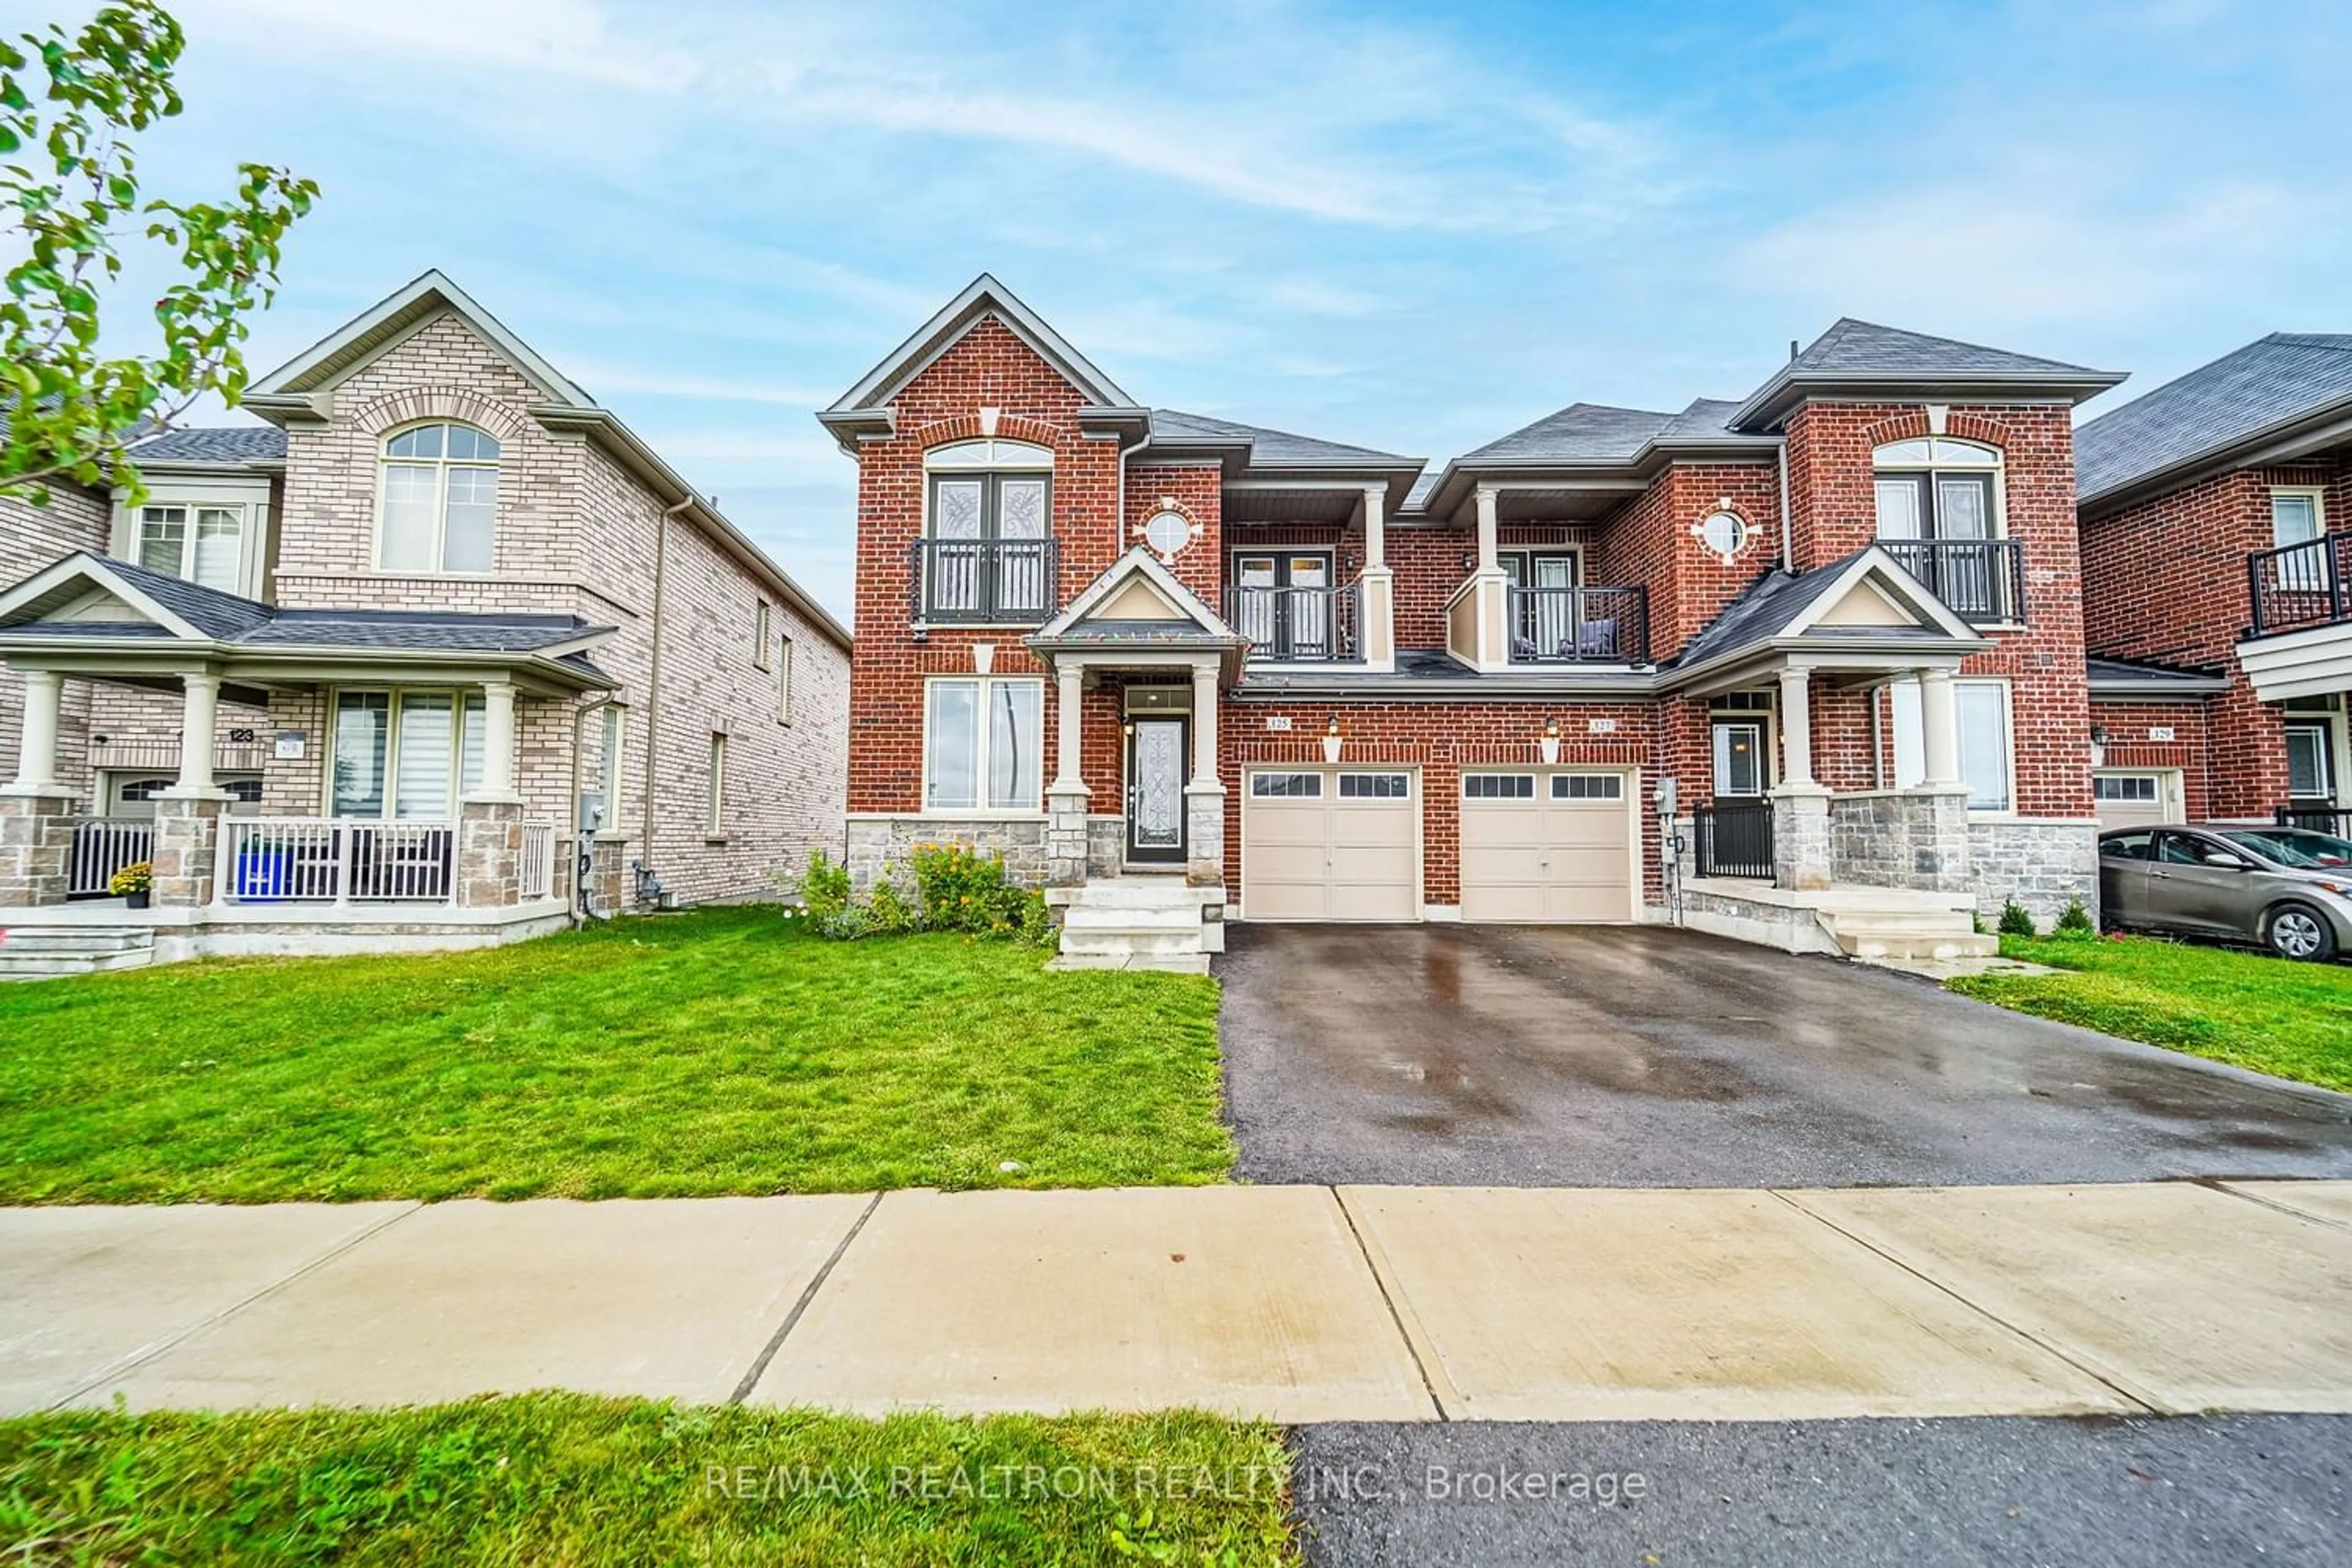 Home with brick exterior material for 125 Jim Mortson Dr, East Gwillimbury Ontario L0G 1R0